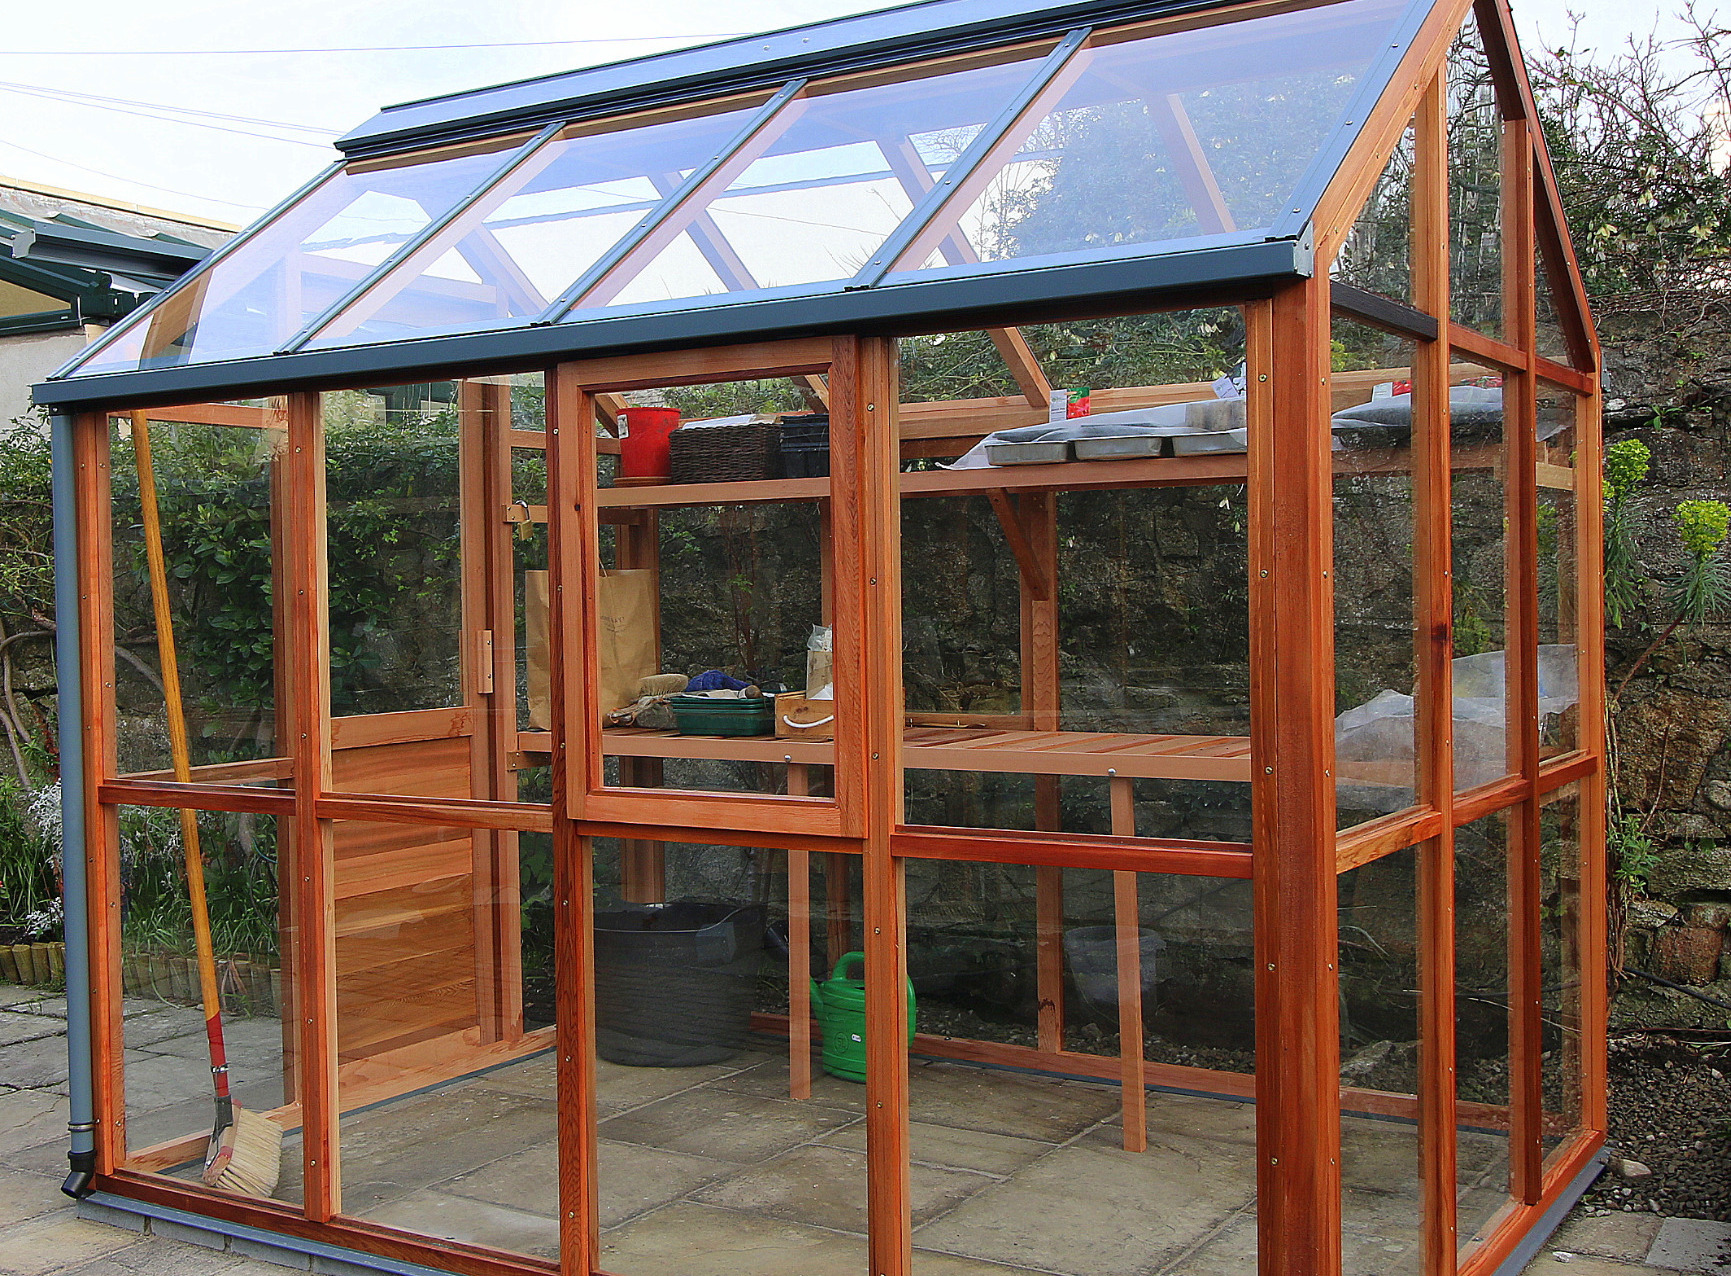 Gabriel Ash Classic Six Greenhouse in Monkstown, Co Dublin | the only timber greenhouses endorsed by the RHS | Owen Chubb  087-2306128